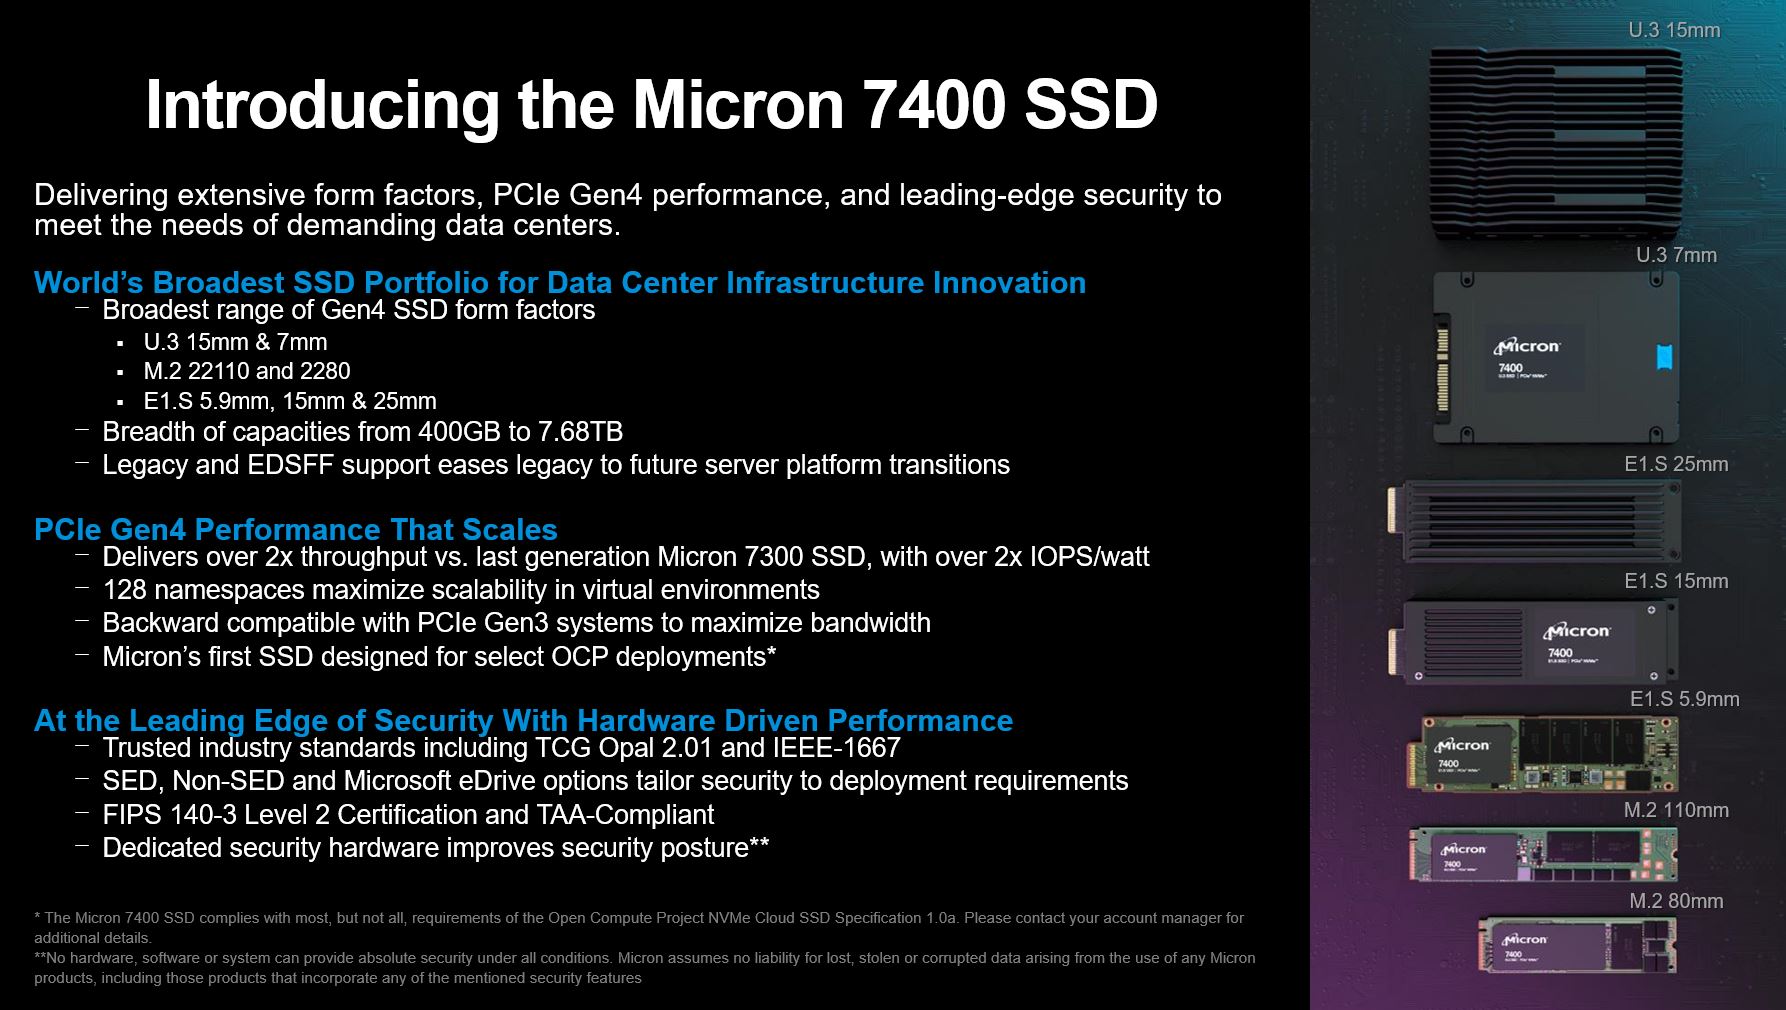 Micron 7400 Pro SSD Introduction 2